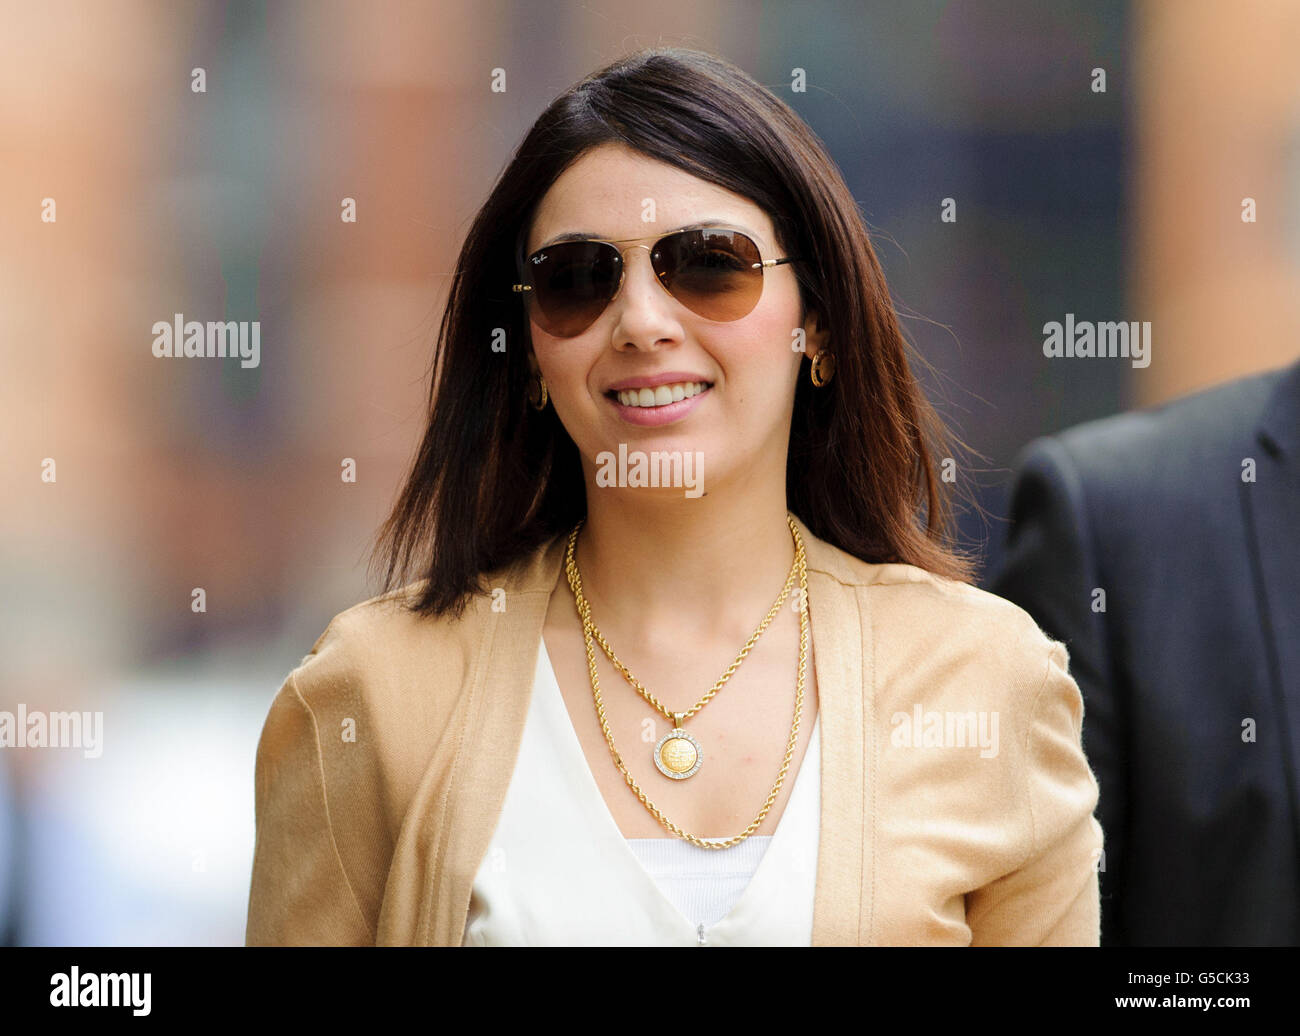 Nur Nadil, the wife of former fugitive tycoon Asil Nadir, arrives at the Old Bailey, central London, as the jury will continue deliberating on nine charges against him today - the day after they left him facing a prison sentence for plundering millions from his Polly Peck business empire. Stock Photo